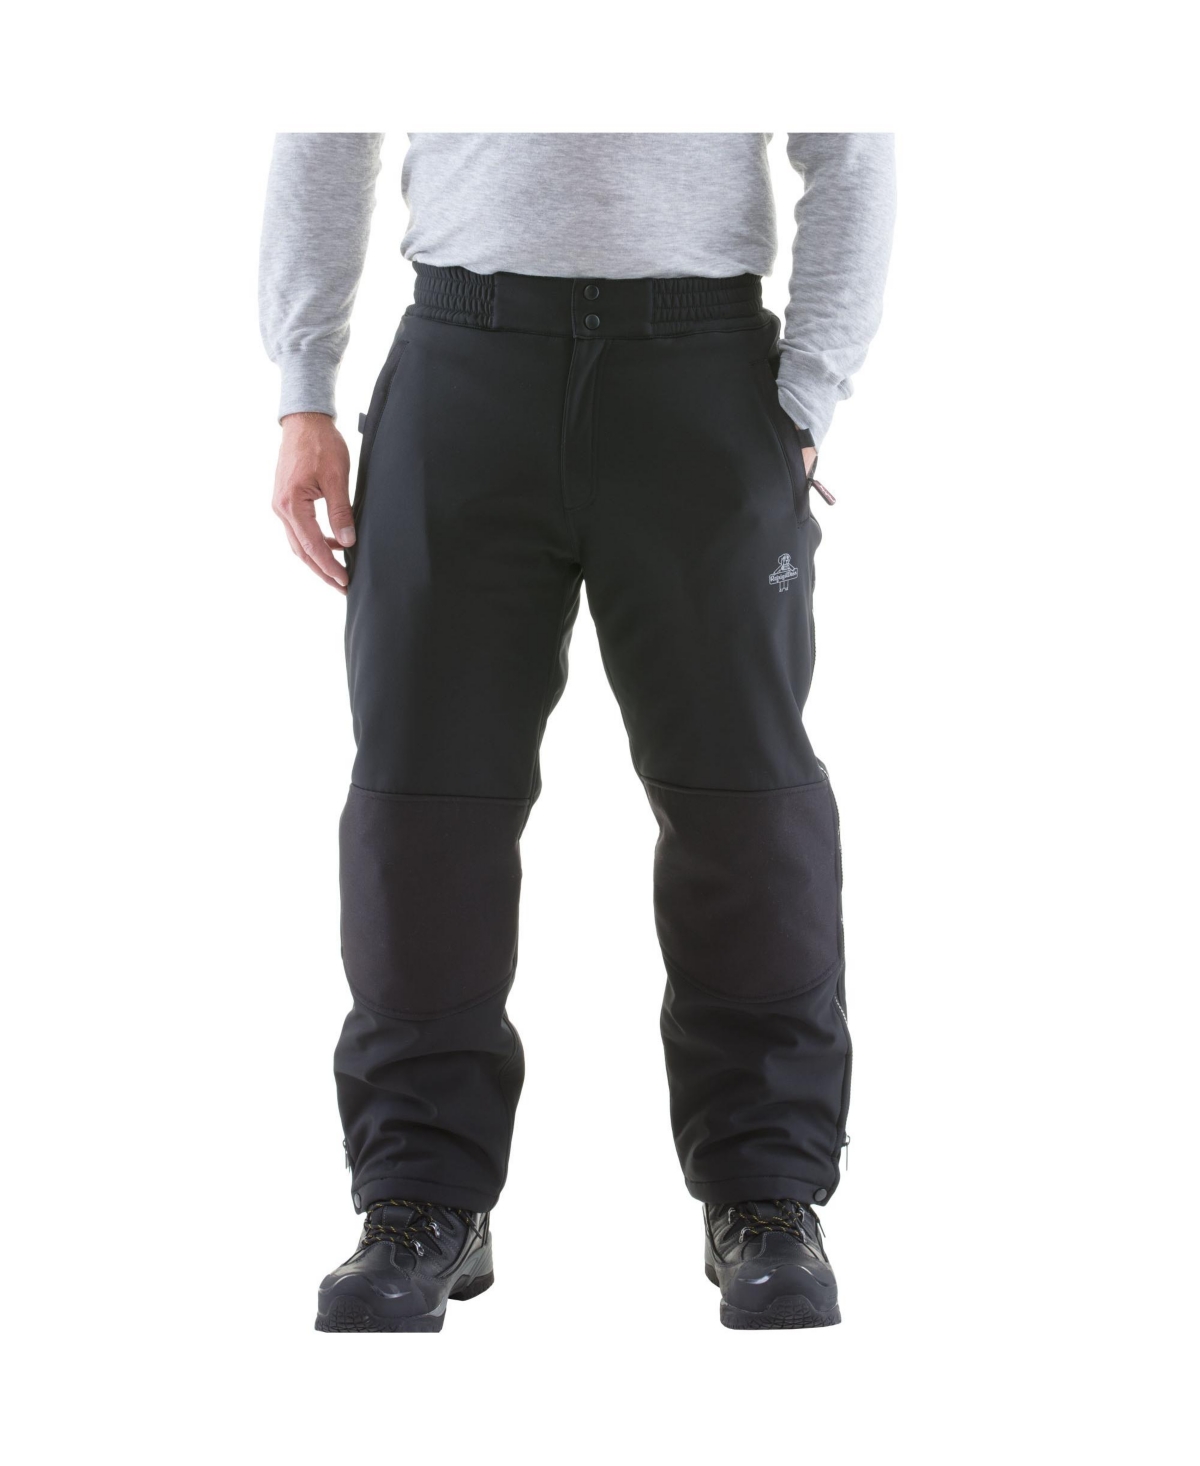 Men's Warm Water-Resistant Softshell Pants with Micro-Fleece Lining - Black